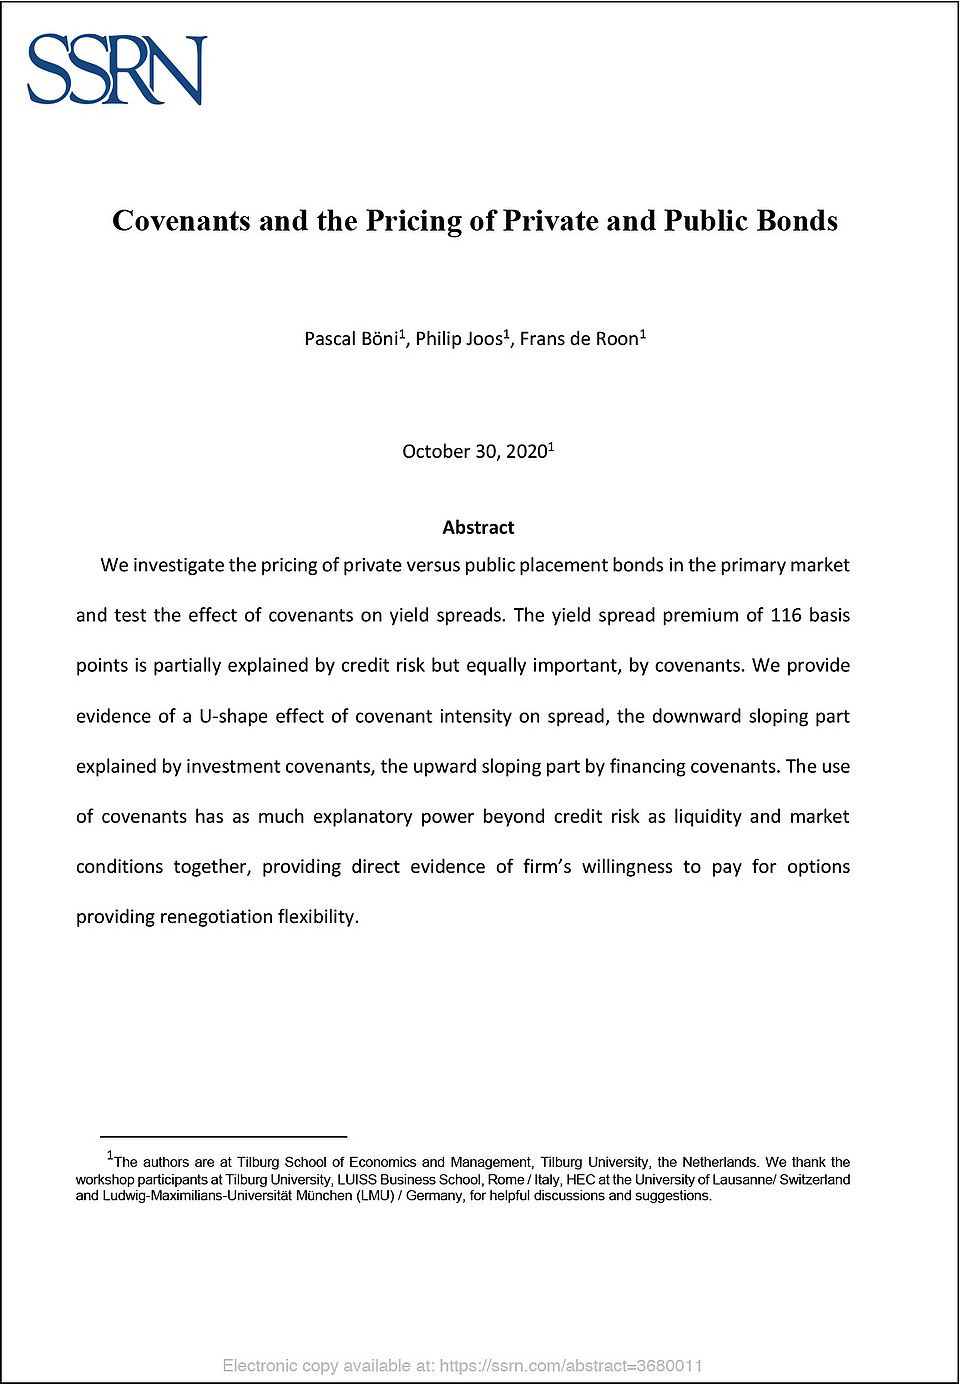 Covenants and the Pricing of Private and Public Bonds